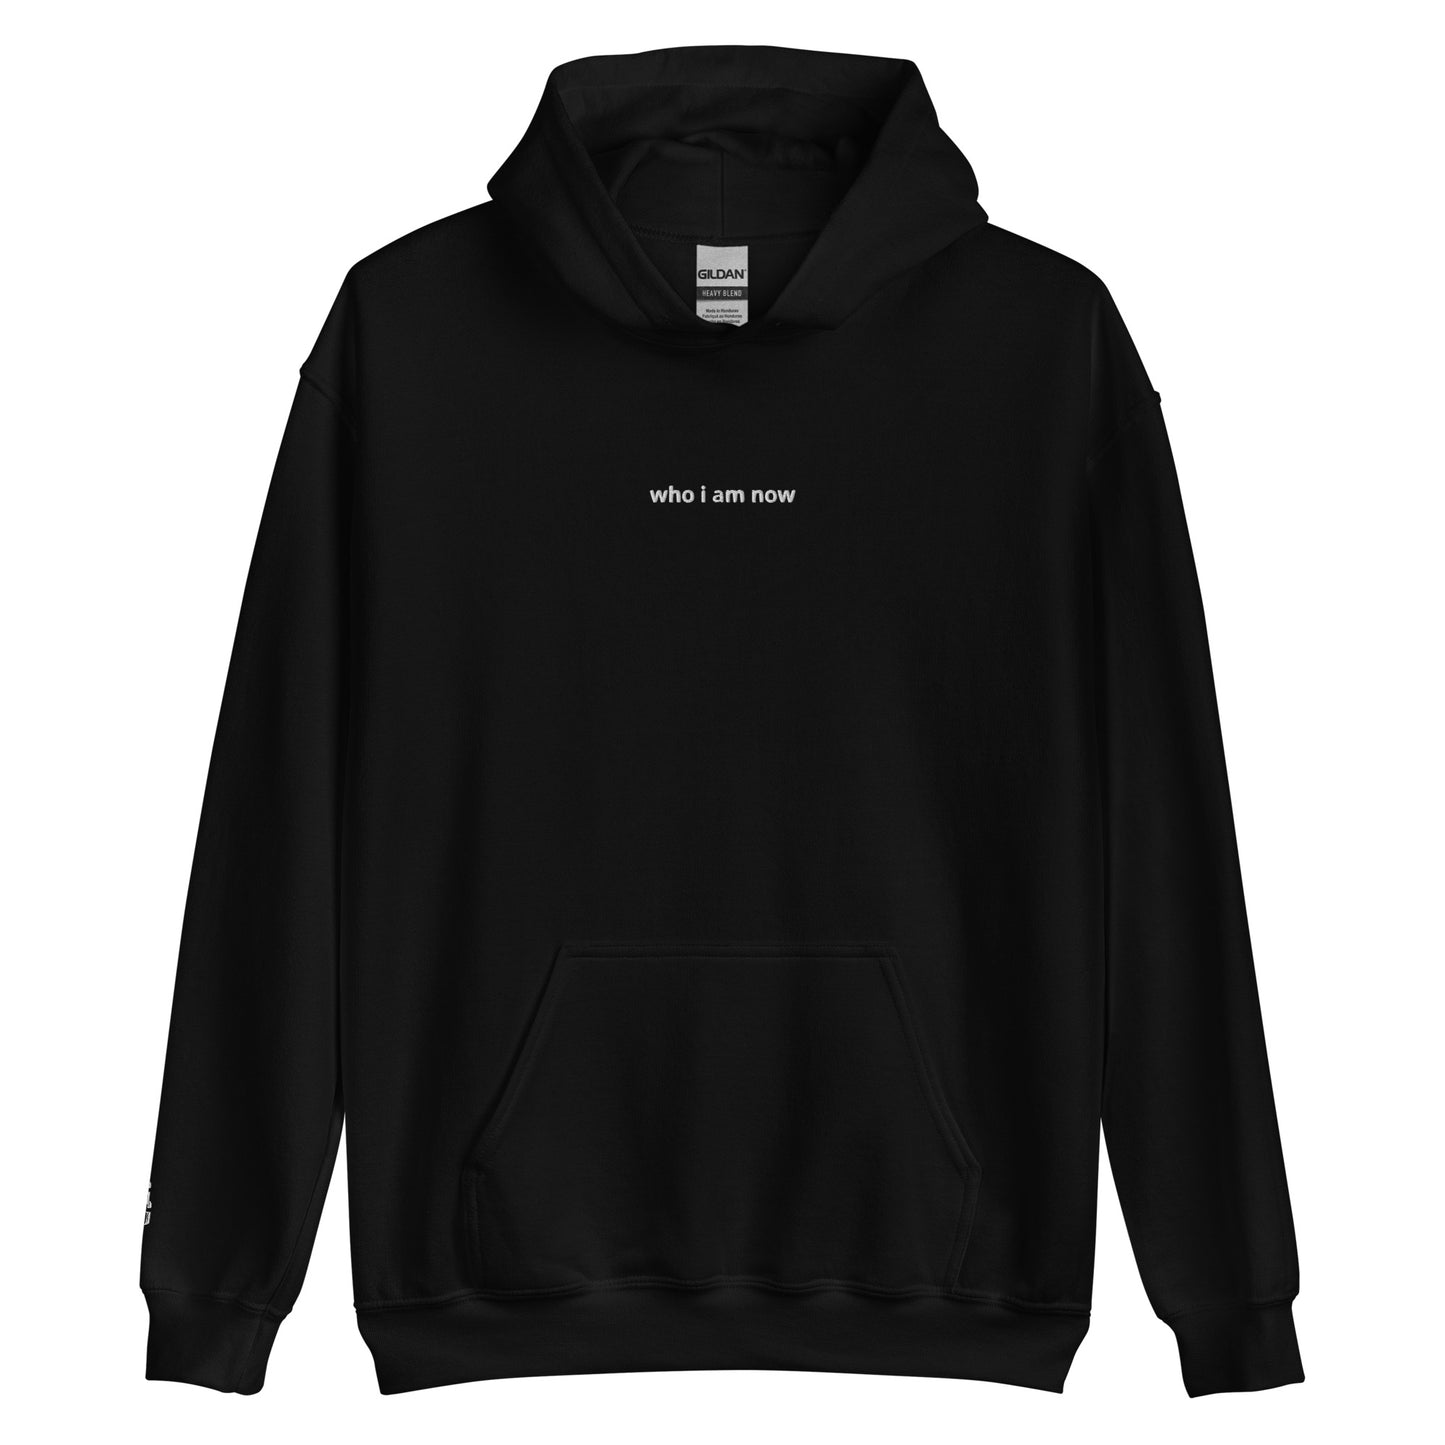 "who I am now" hoodie